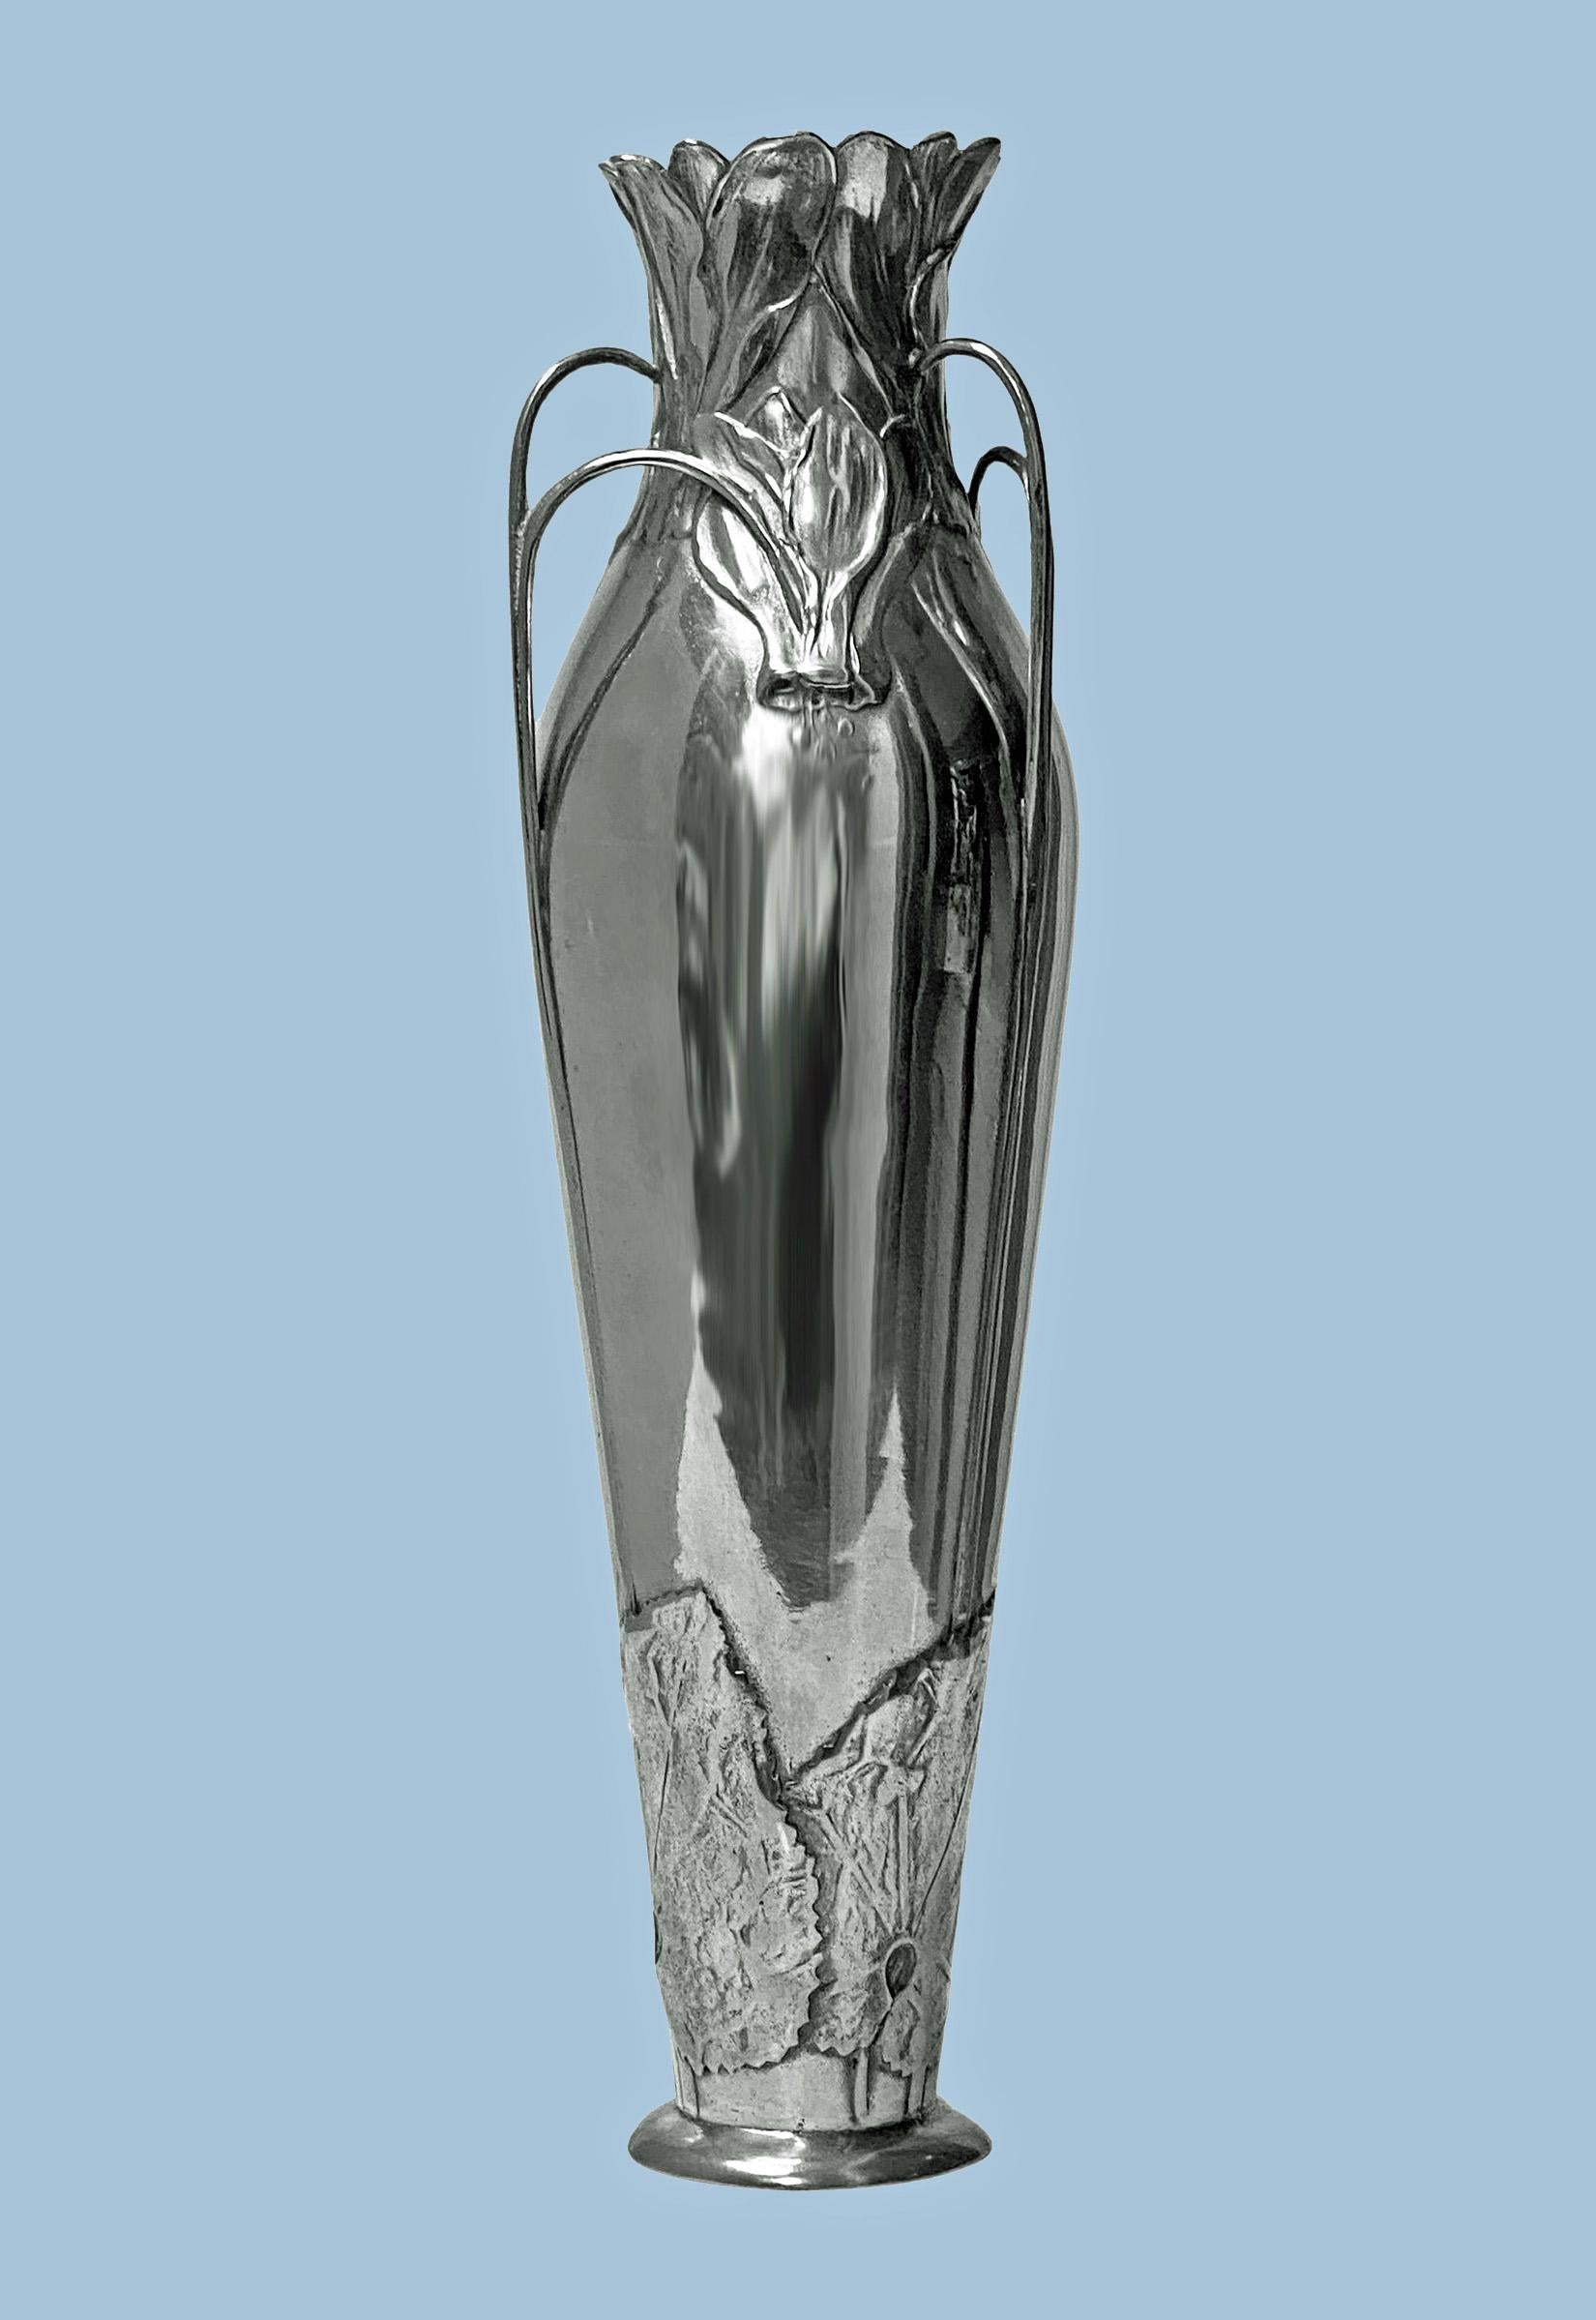 Art Nouveau polished pewter Vase designed by Hugo Levin for Kayserzinn, Germany, C.1900. The slender tapered Vase on circular base with a large frieze of leaf surround, the top with a surround of stylised floral foliage decoration out of which